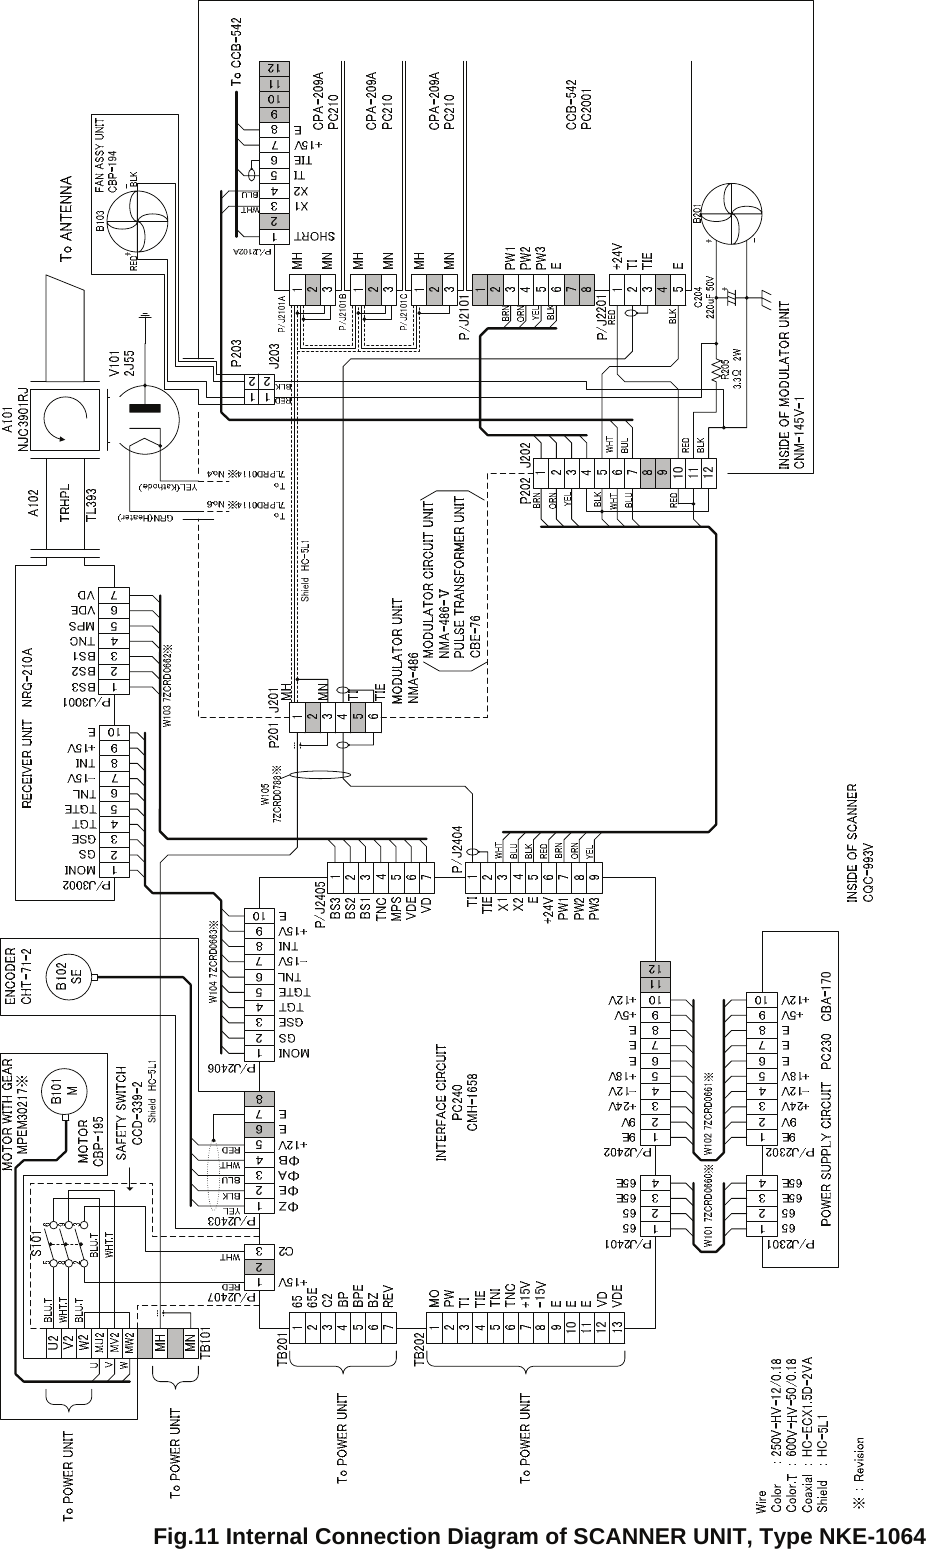 Fig.11 Internal Connection Diagram of SCANNER UNIT, Type NKE-1064